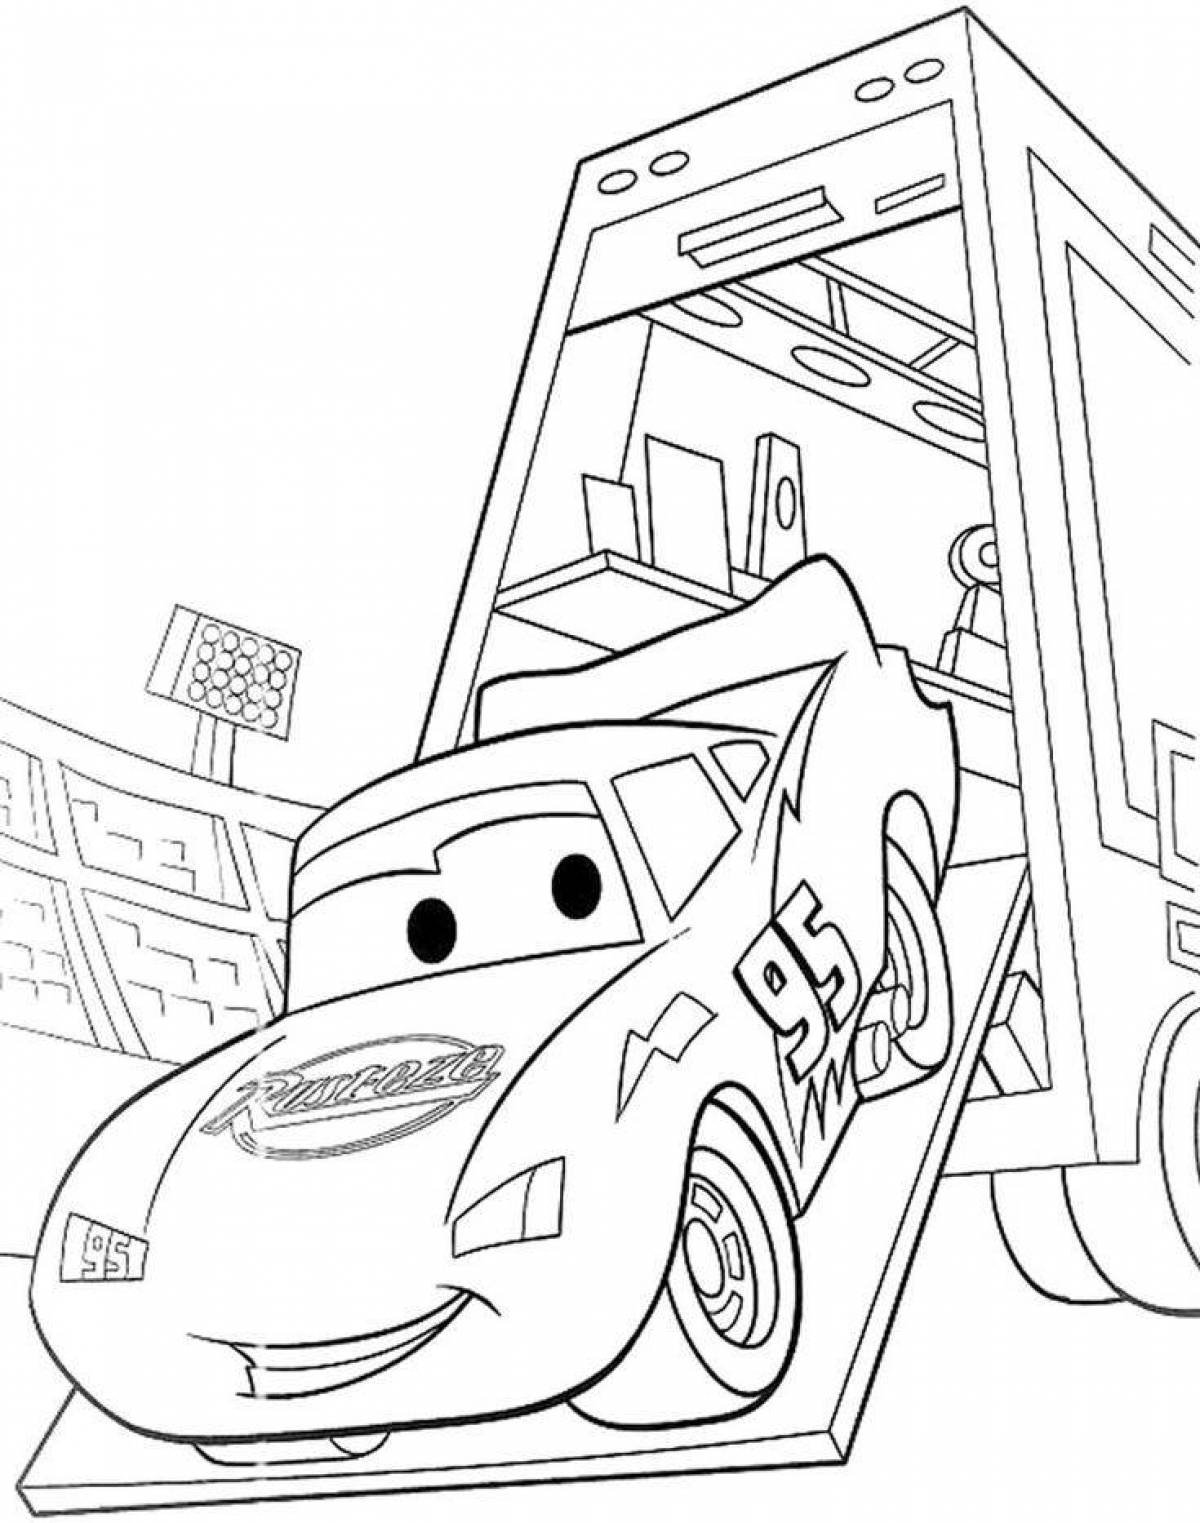 Lightning mcqueen's exciting coloring book